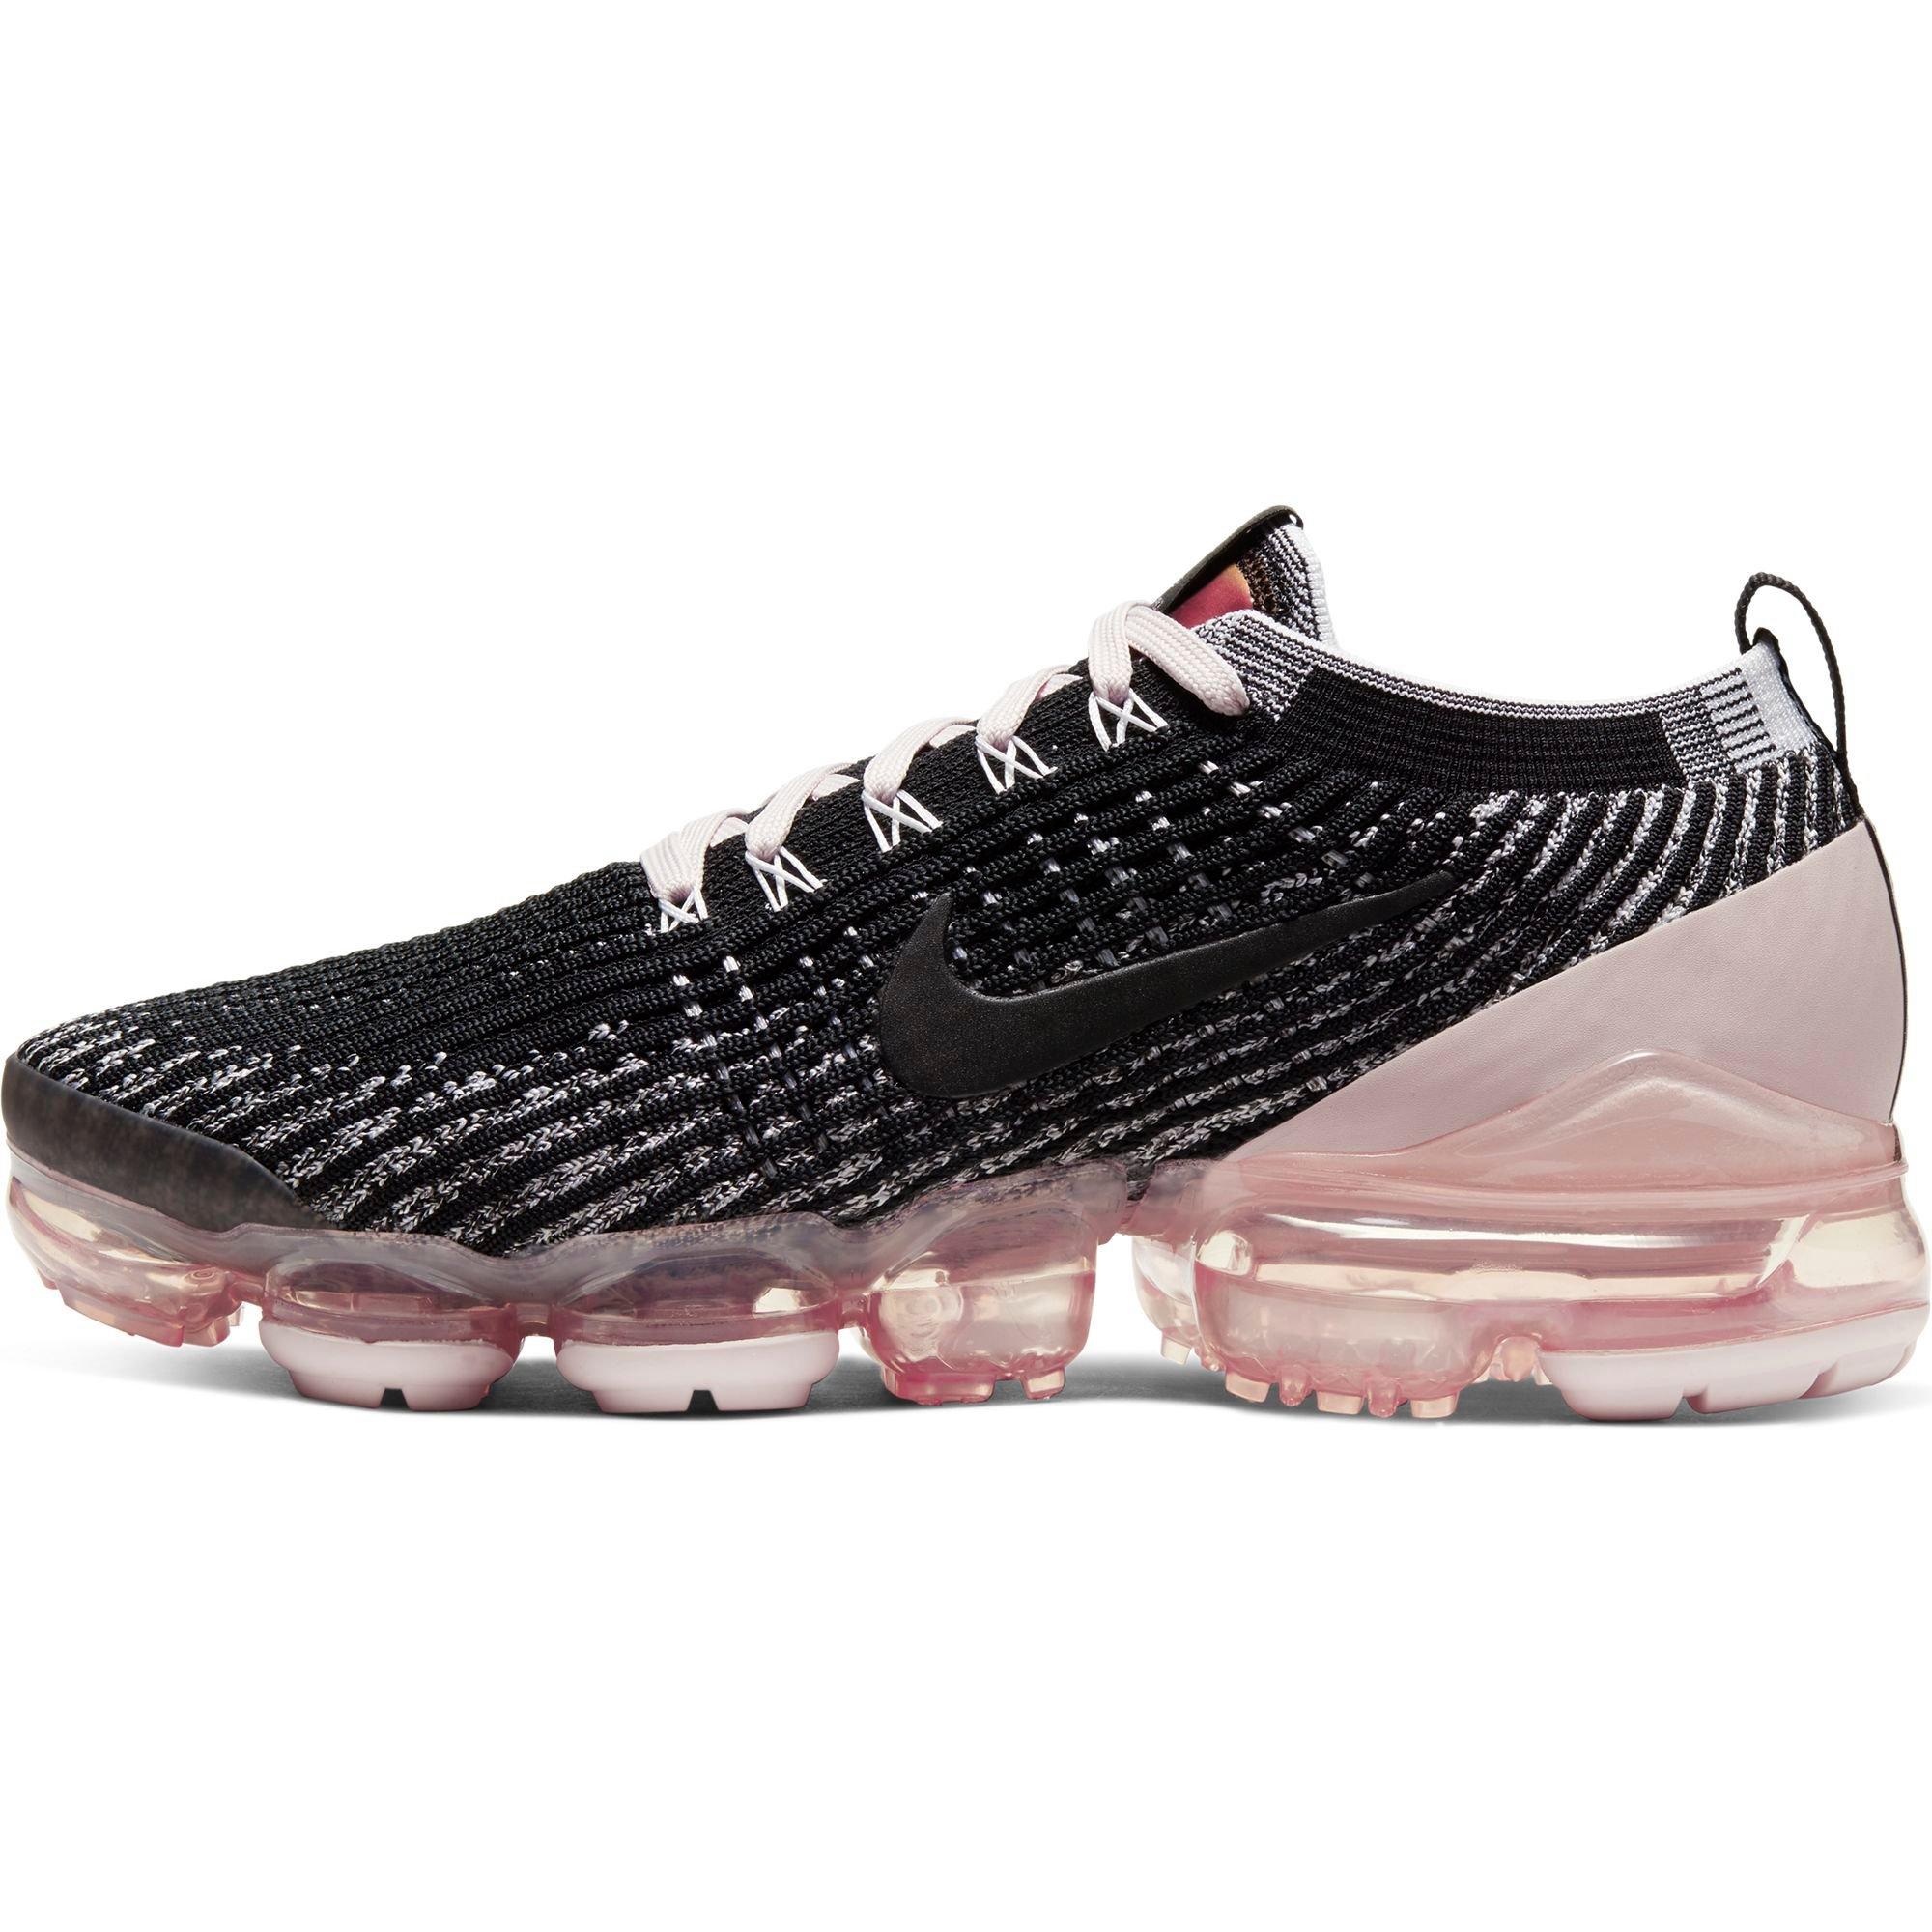 vapormax flyknit 3 pink and black